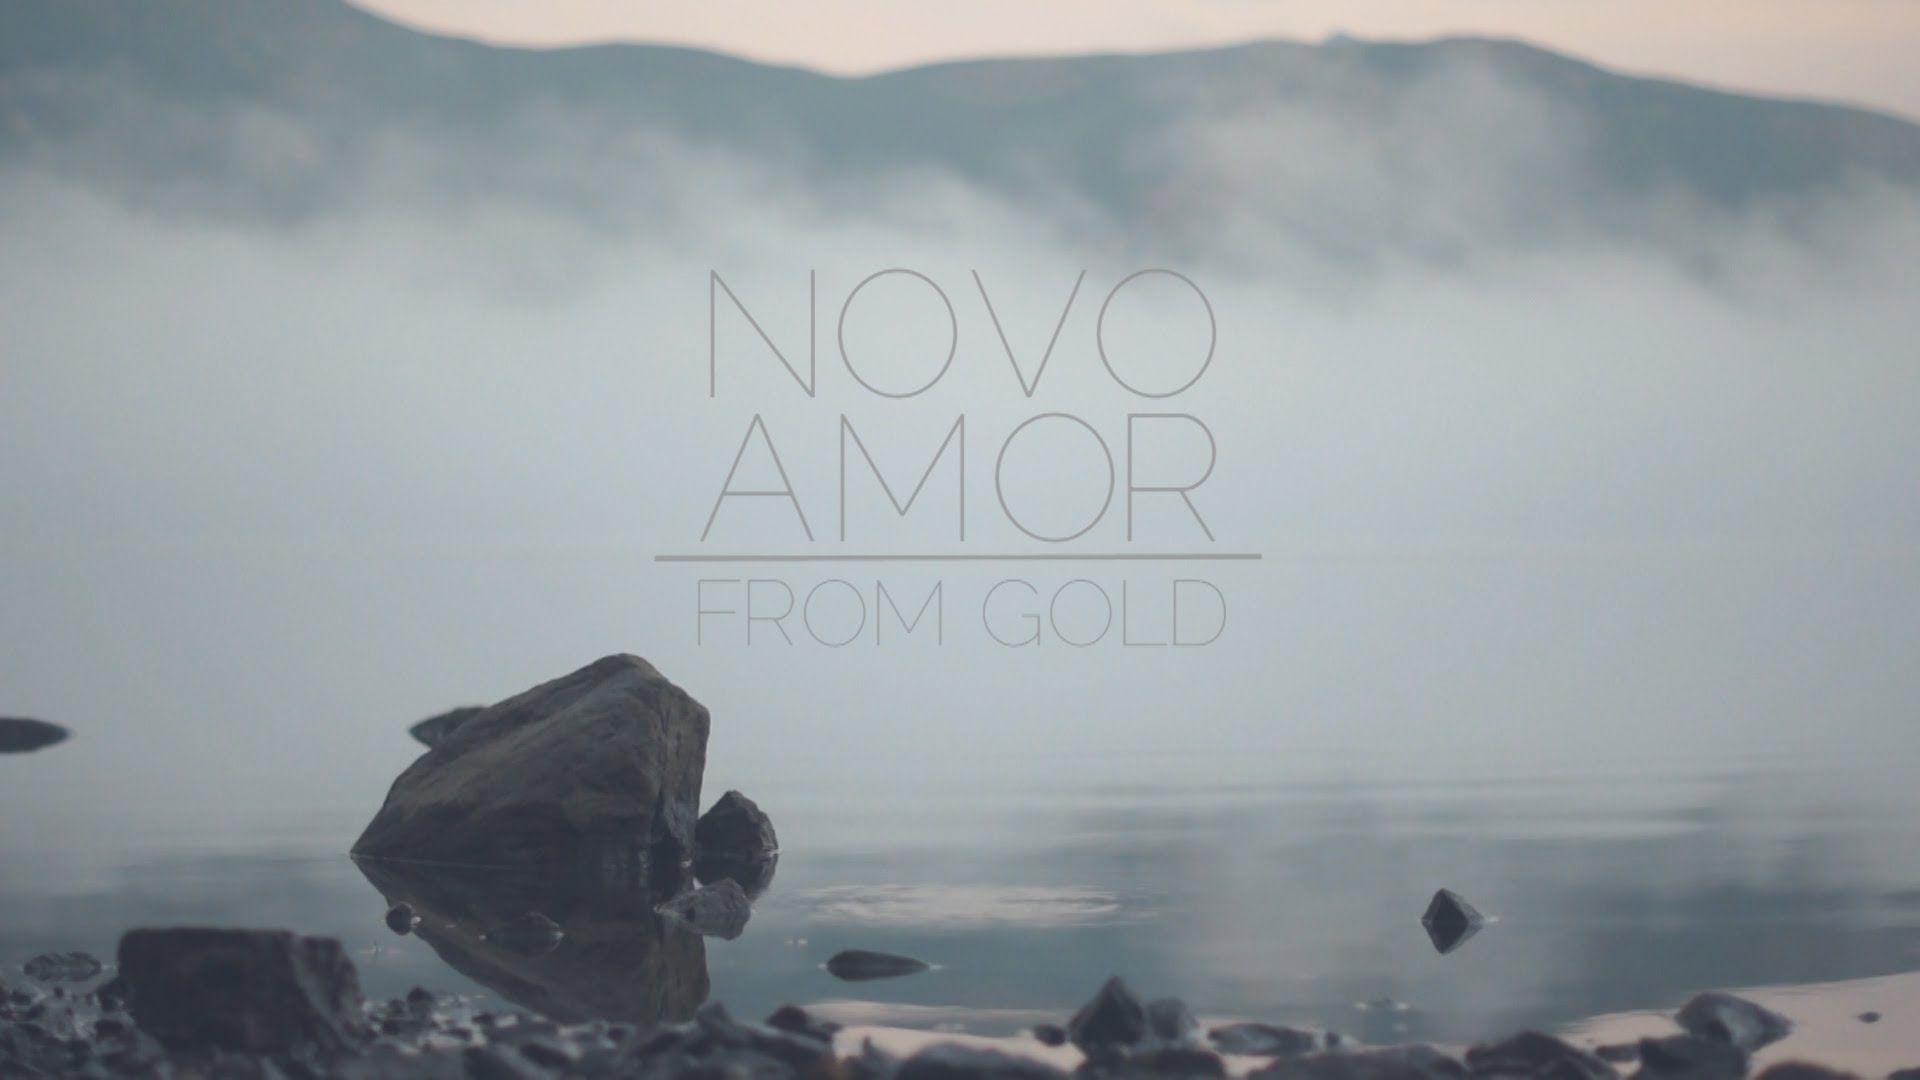 NOVO AMOR Gold. Welcome to the jungle, Music album covers, Letting go of him